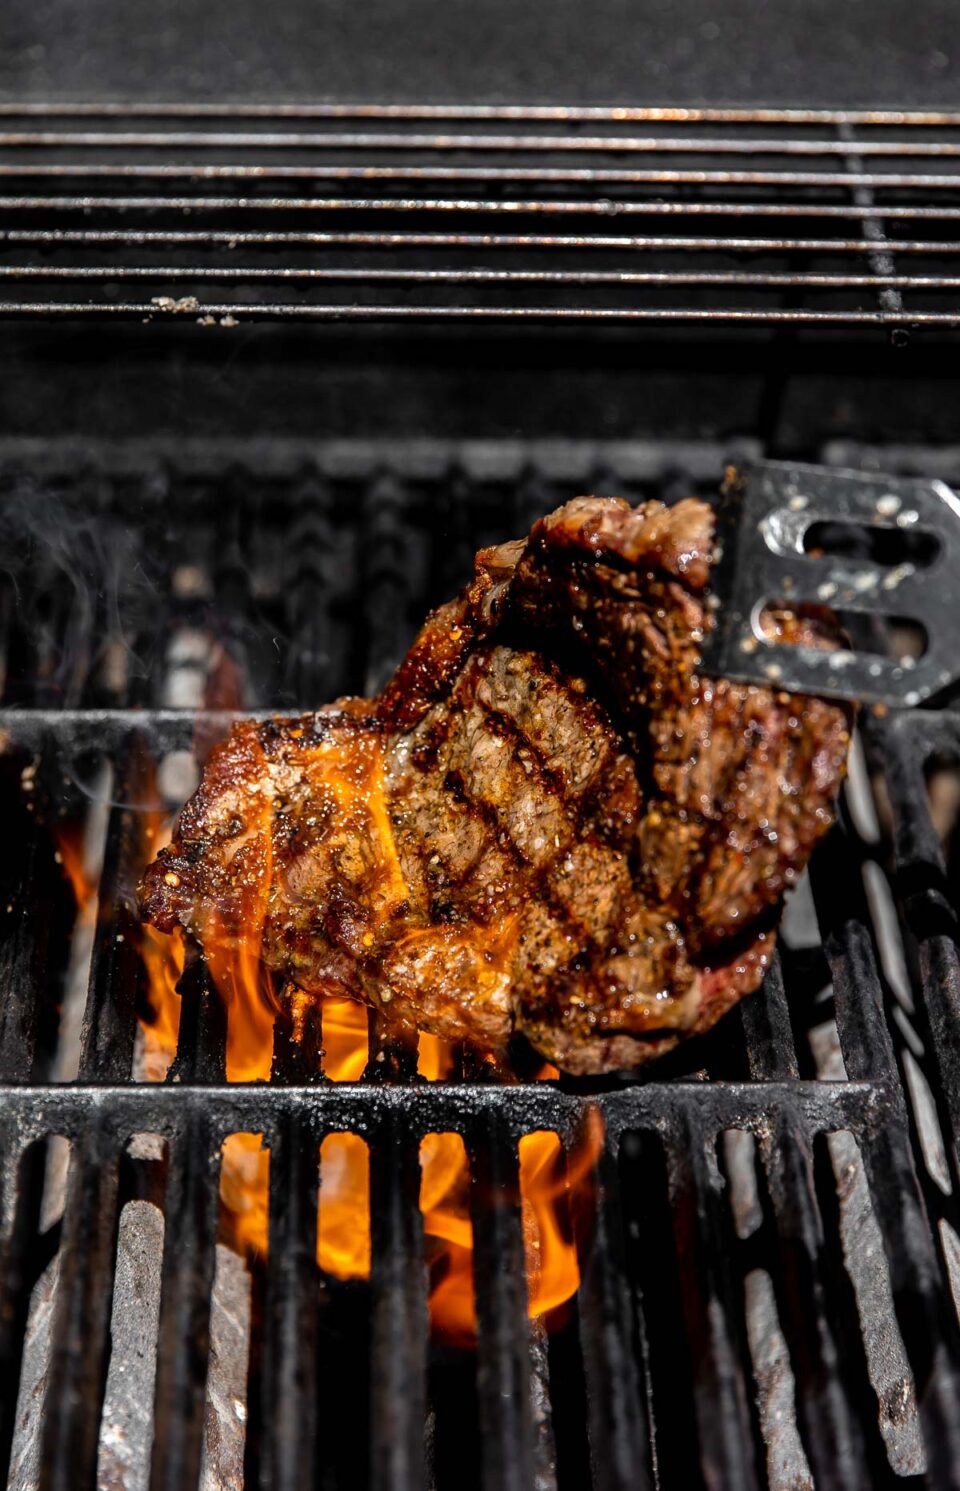 A pair of metal grill tongs works to flip a Tuscan steak over gas grill grates. The steak has visible grill marks and a small flare up of fire can be seen underneath the Tuscan grilled steak.